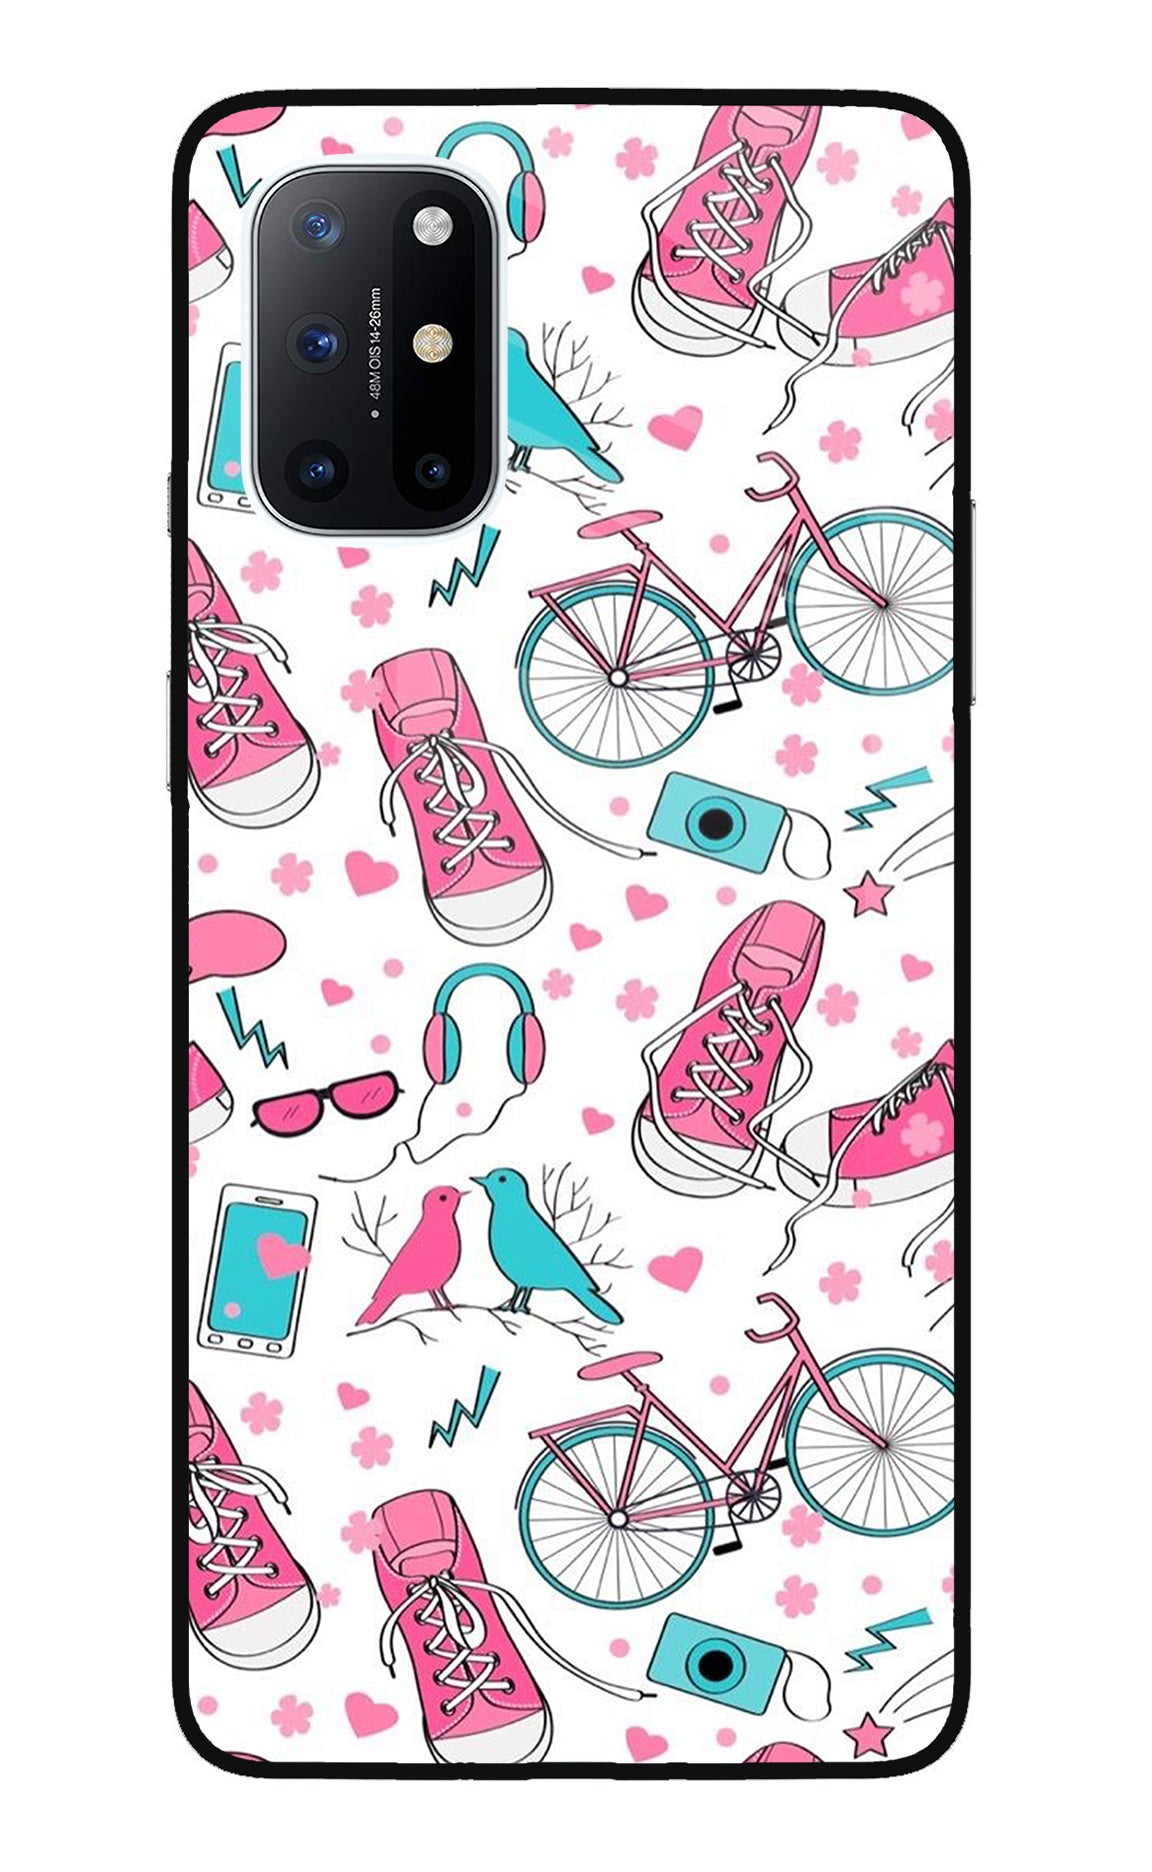 Artwork Oneplus 8T Back Cover